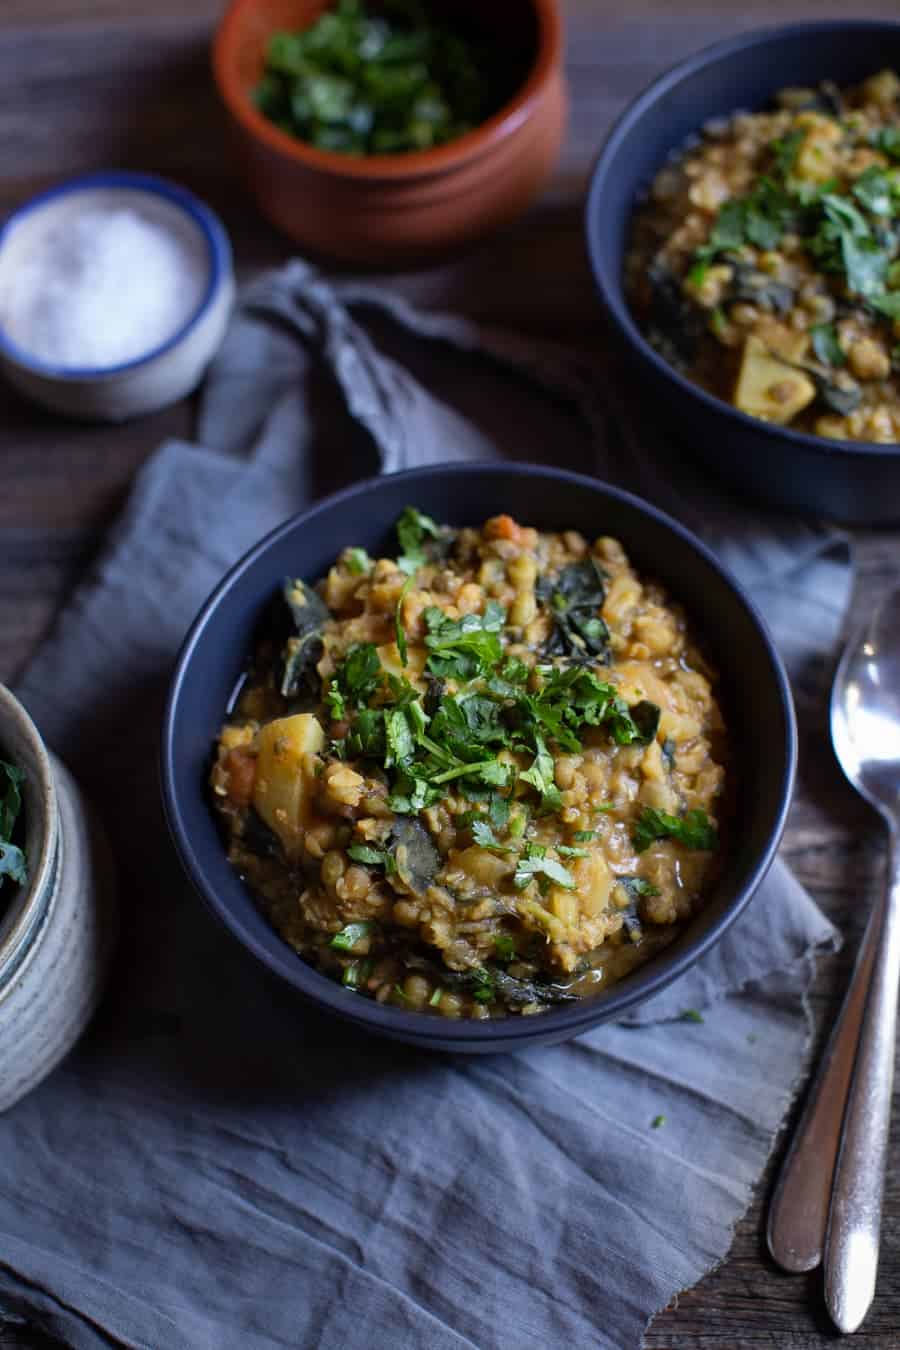 Hearty Mung Bean Stew With Kale served in bowls.